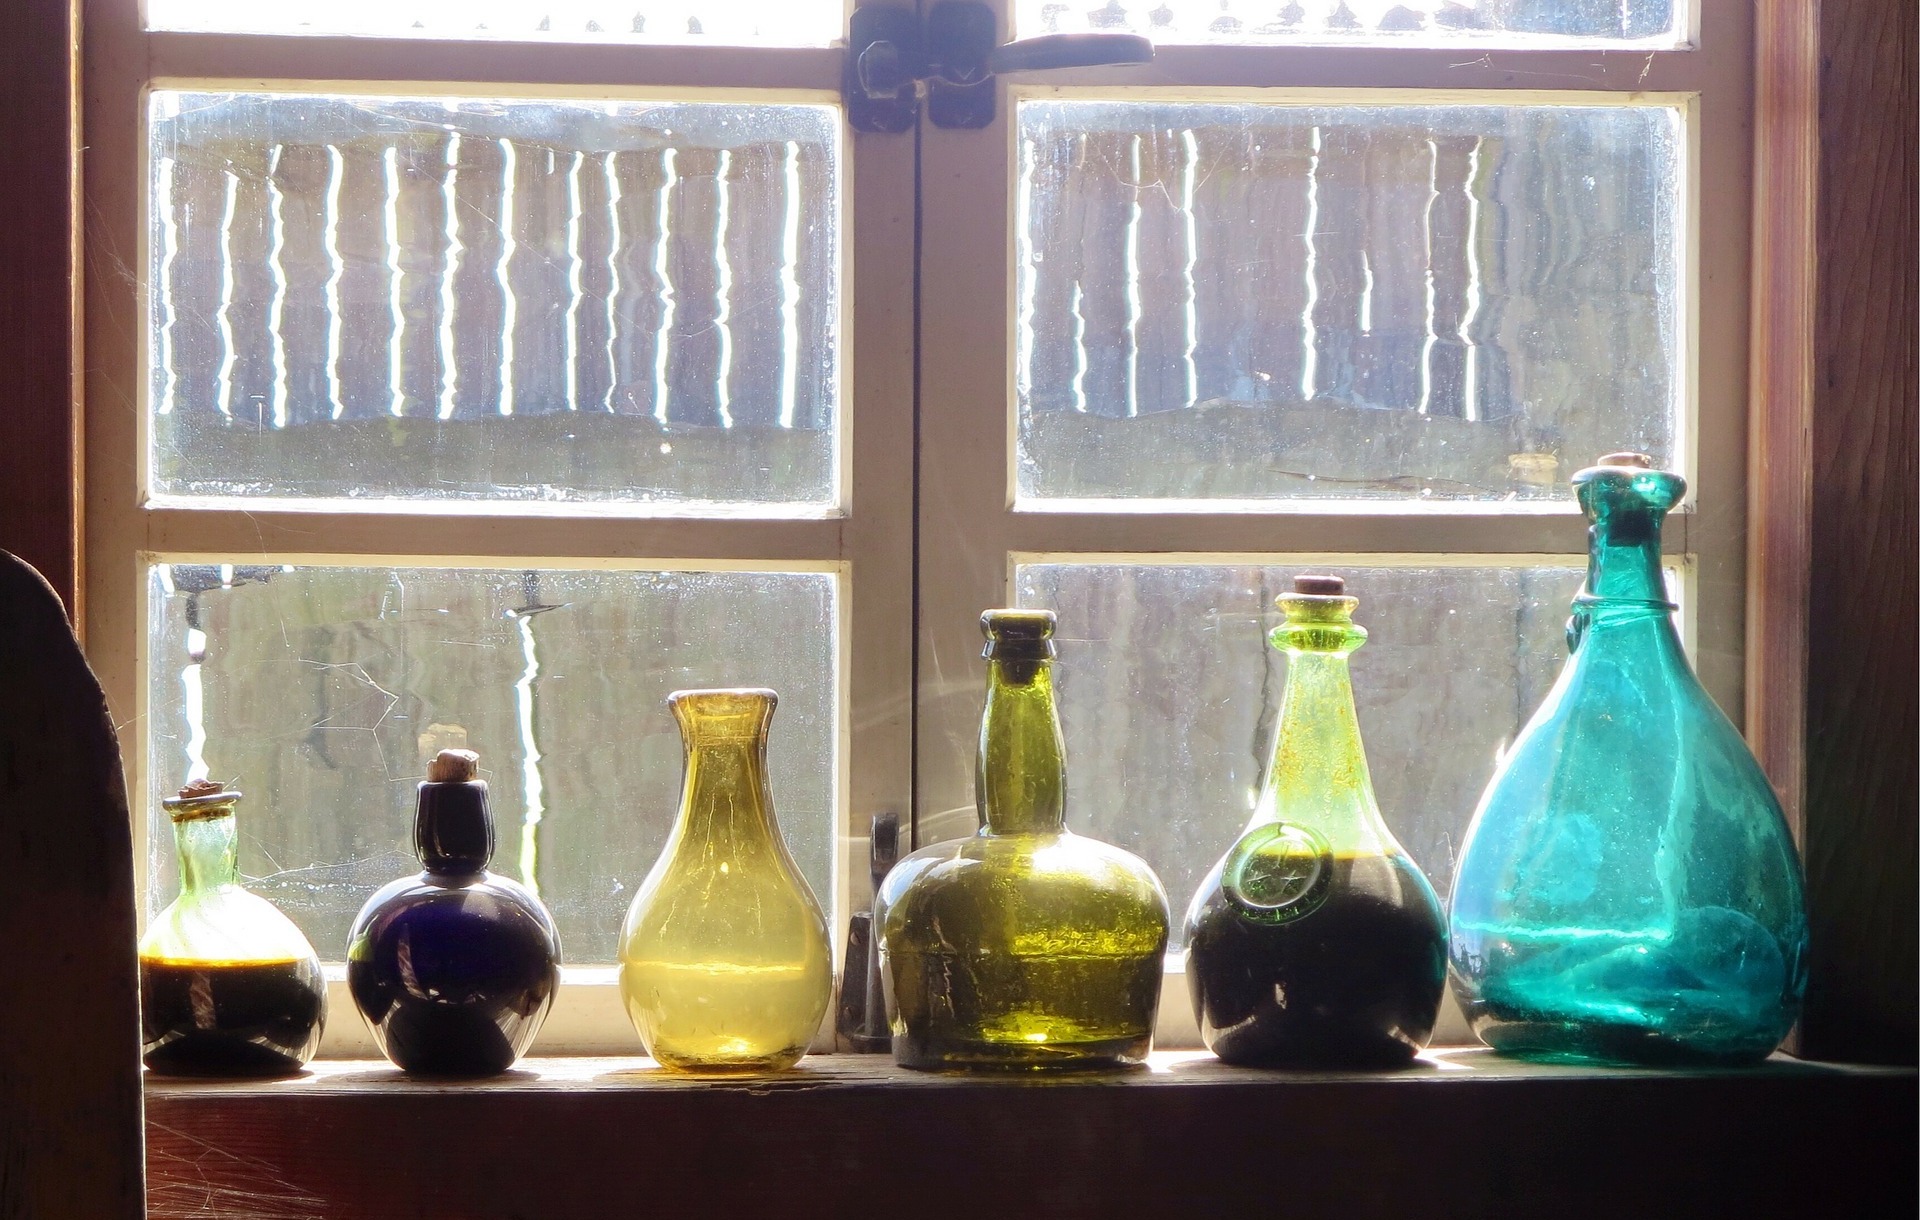 Photo of old bottles on a windowsill, catching the light from outside.